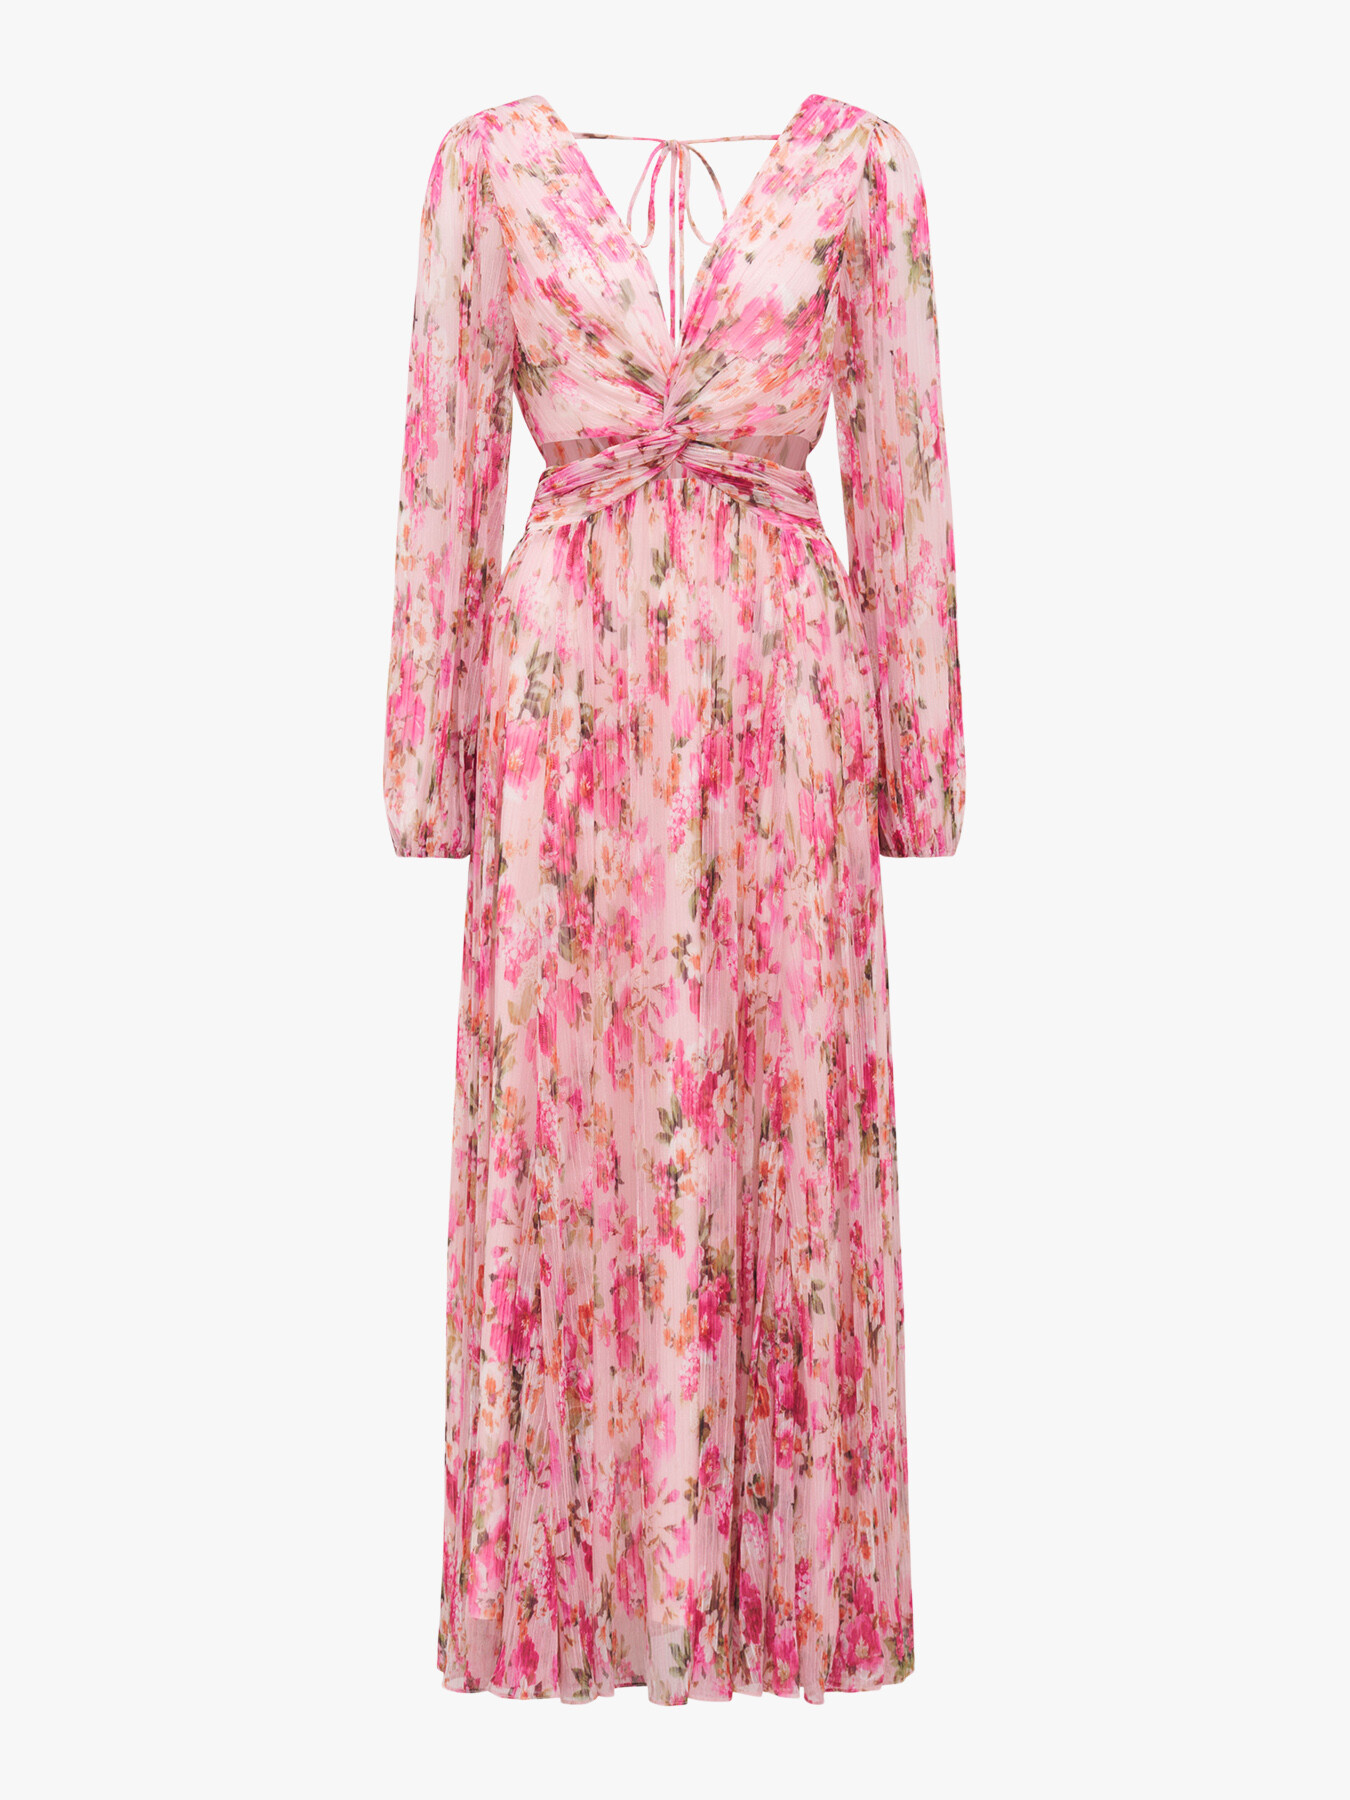 Forever New long sleeve maxi dress in apricot floral